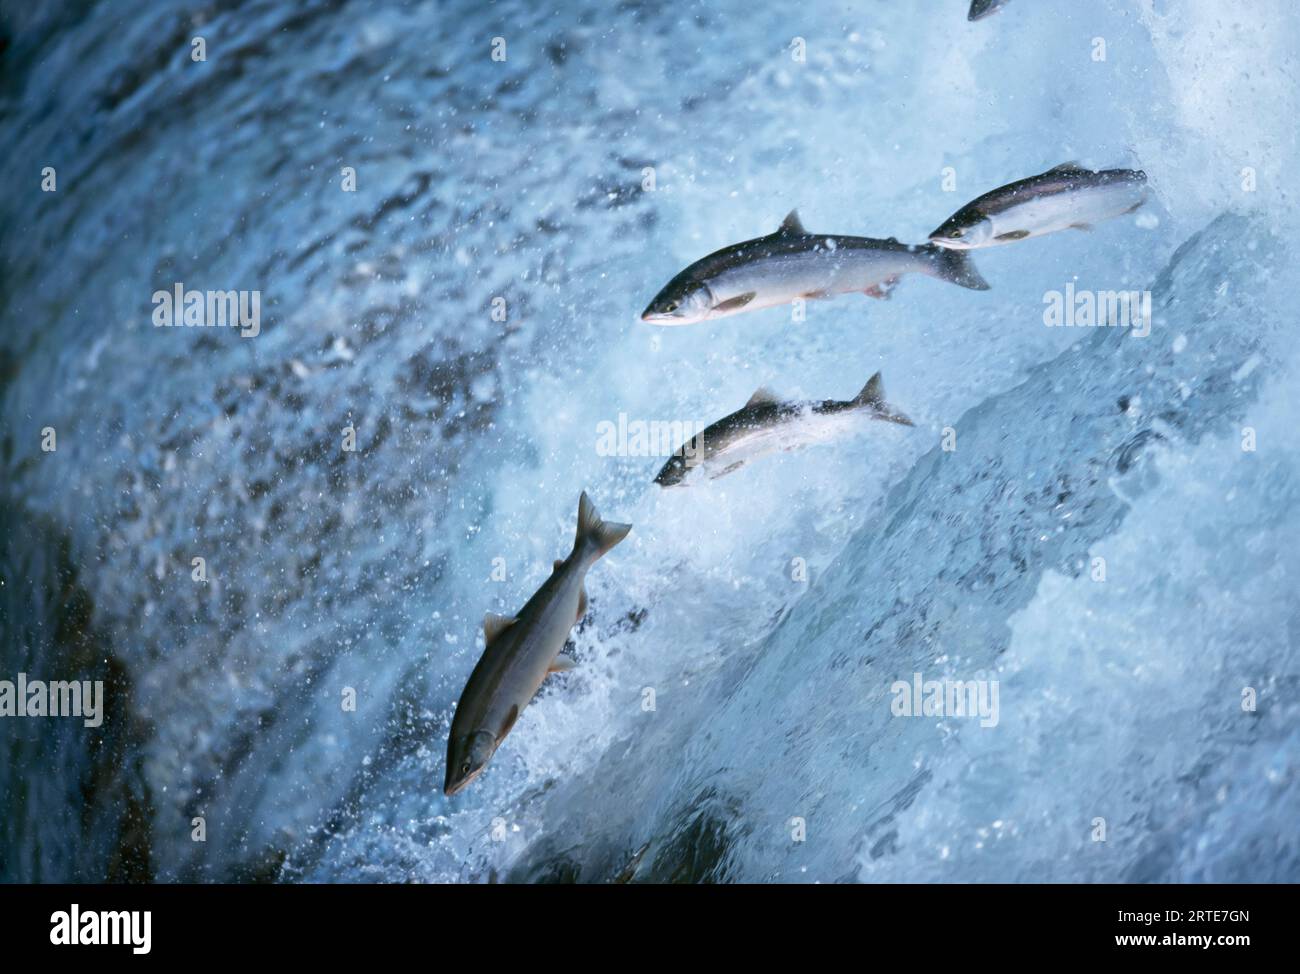 Salmon make the difficult trip up river, some traveling 50-60 miles a day to reach an area where they will spawn, which, as it turns out is usually... Stock Photo